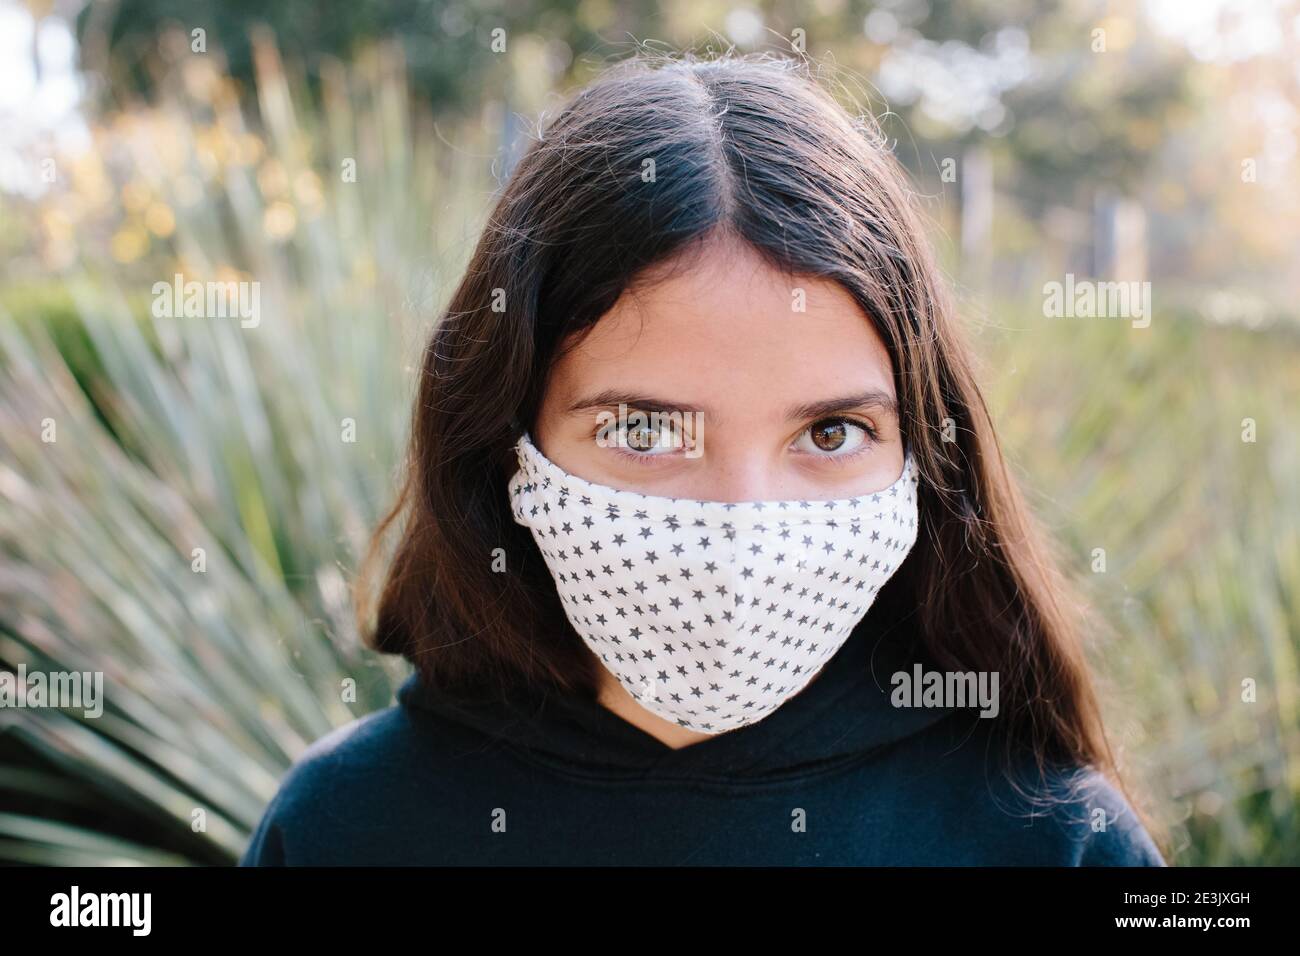 Tween Girl Looking At Camera While Wearing A Cloth Face Mask Stock ...